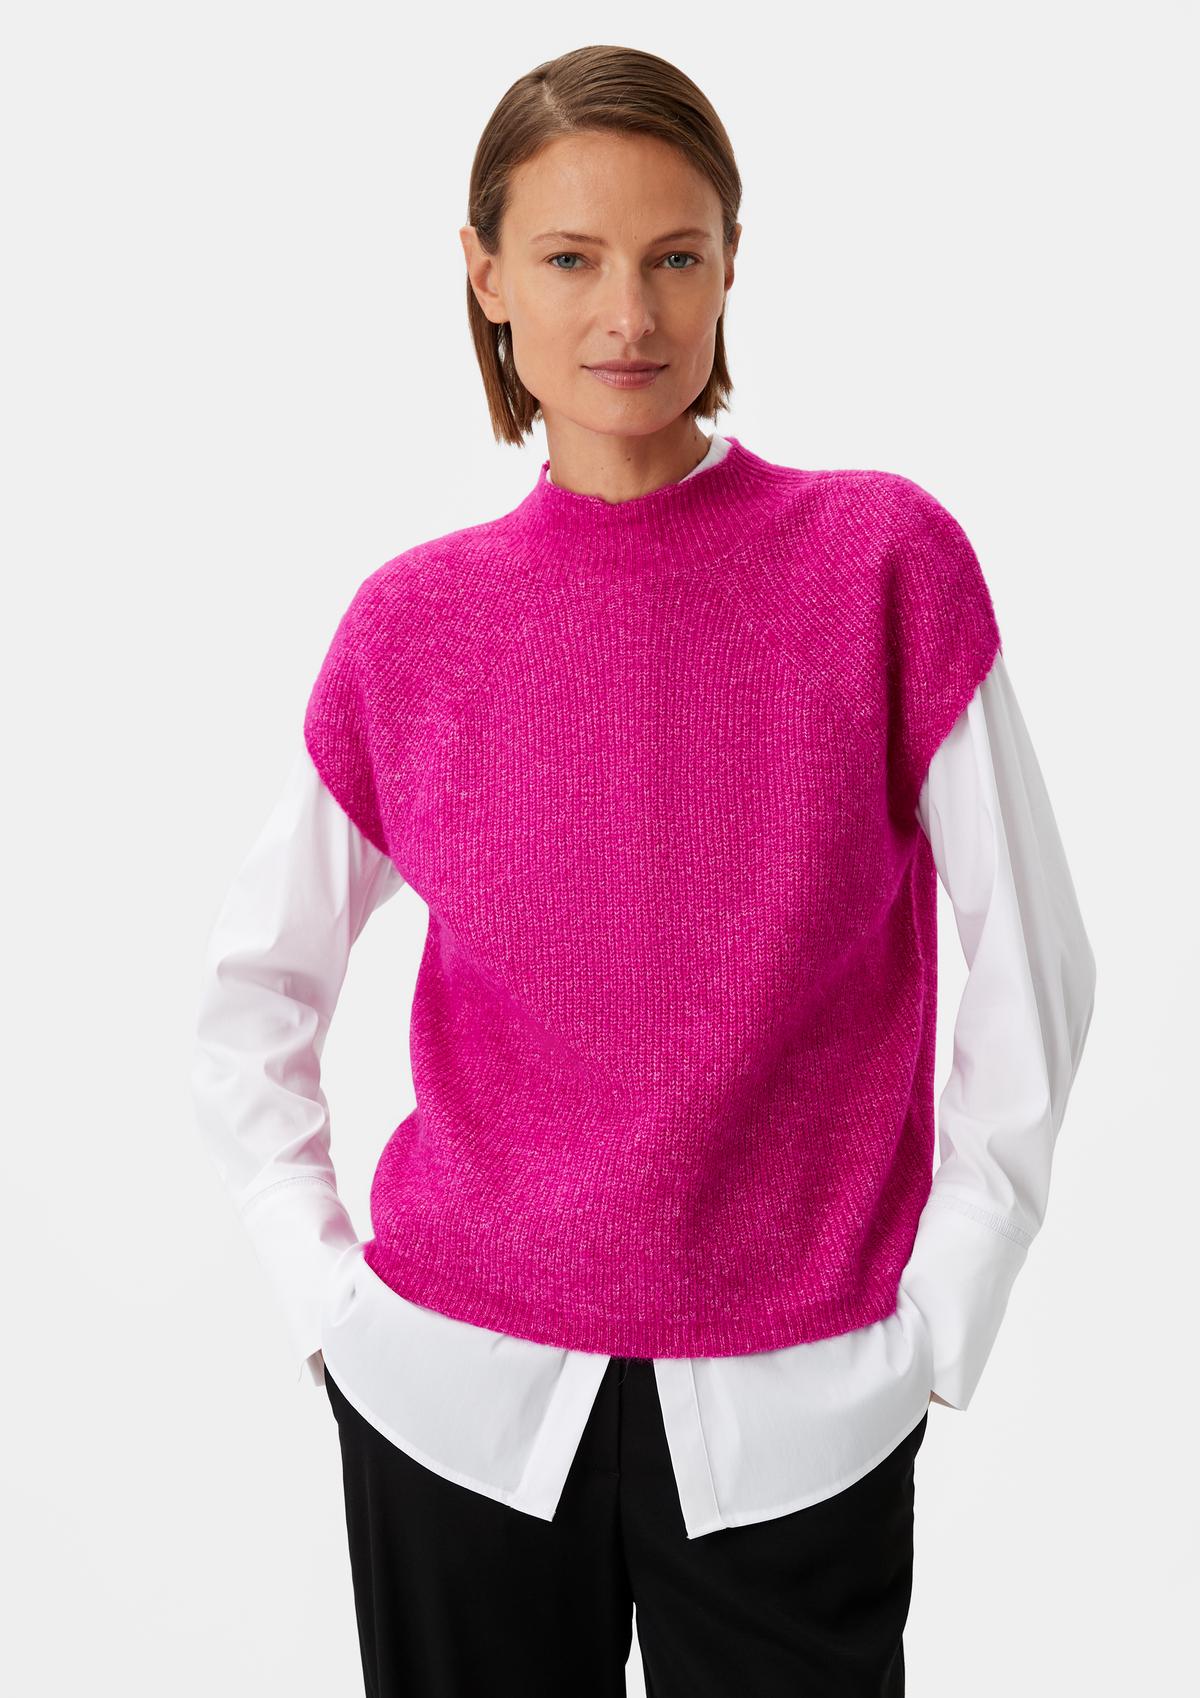 Sleeveless knitted jumper with alpaca wool - pink | Comma